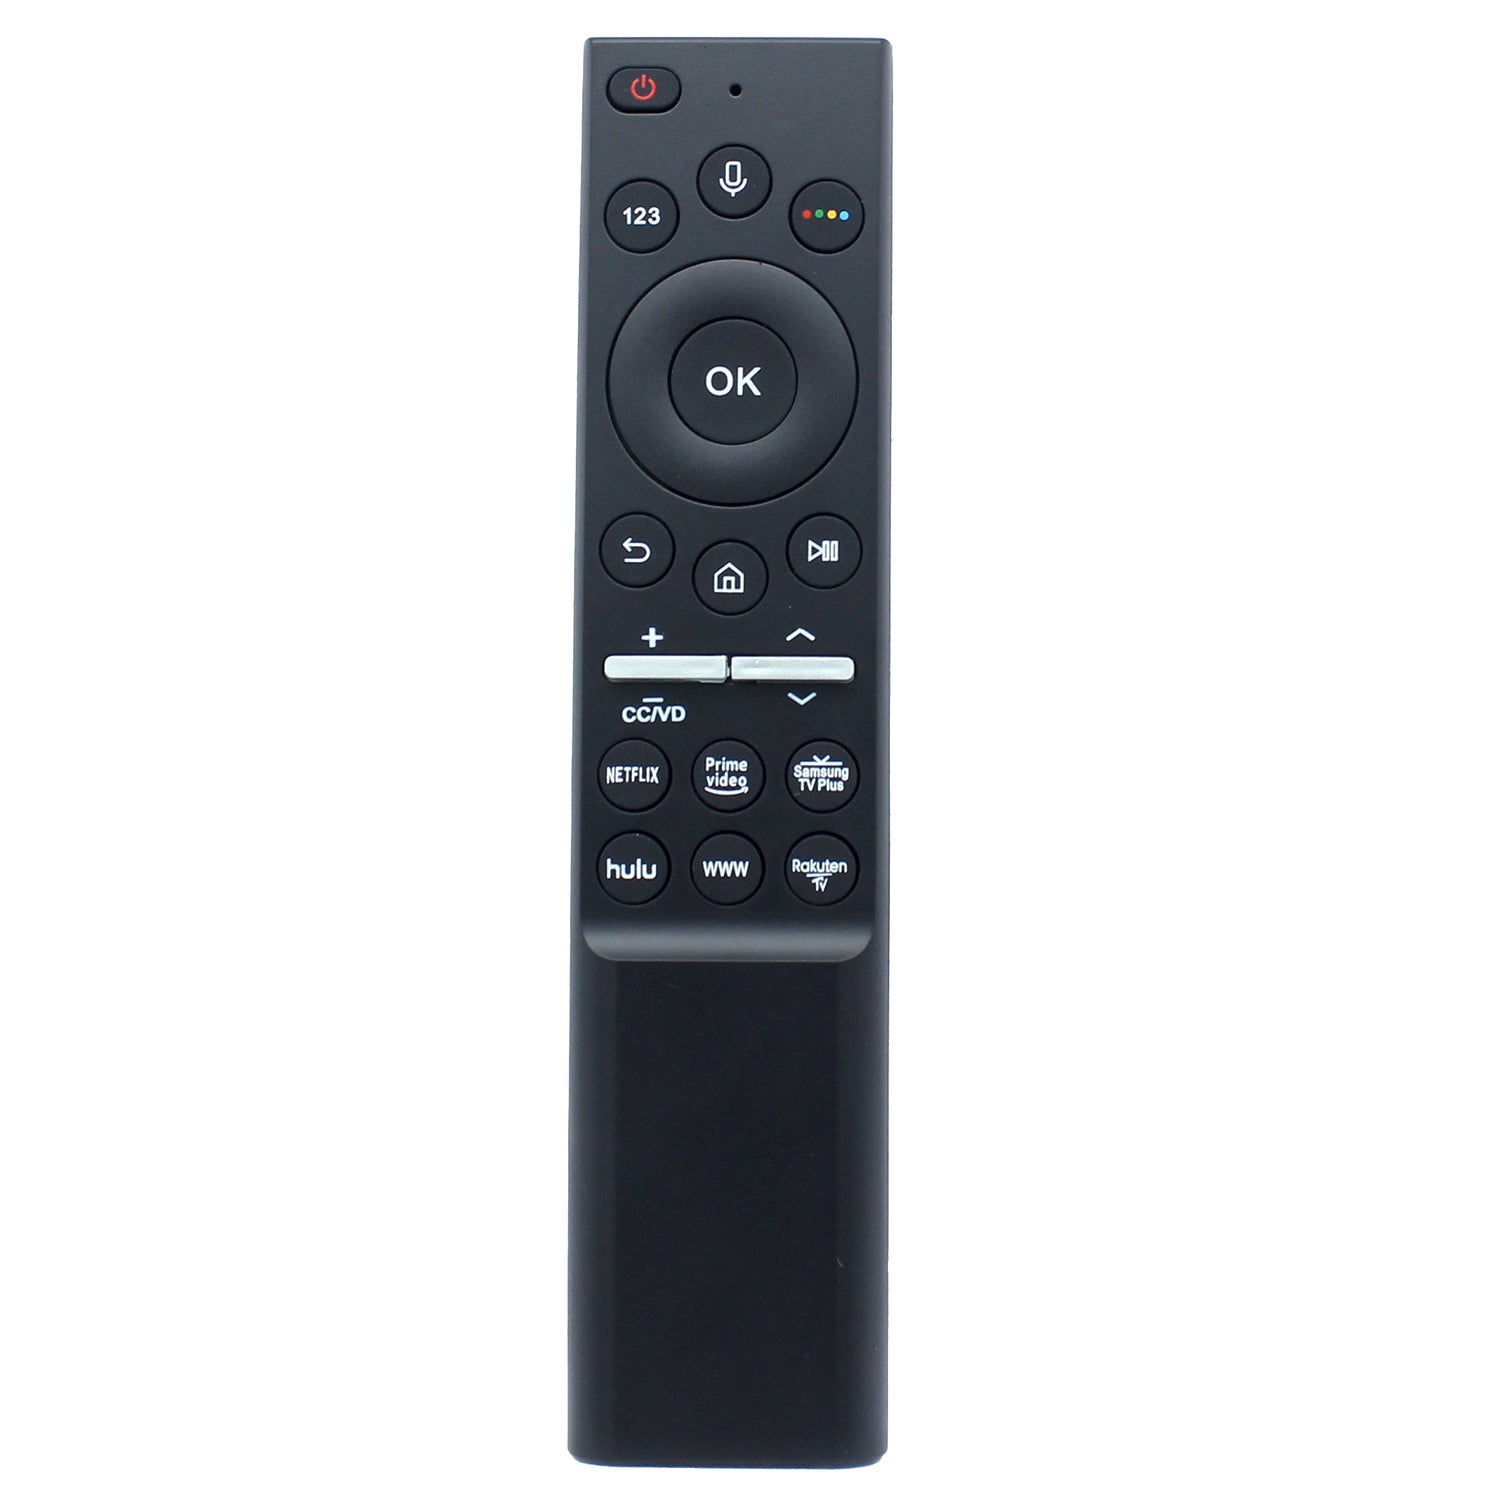 BN59-01329C Remote Replacement For Samsung Smart TV